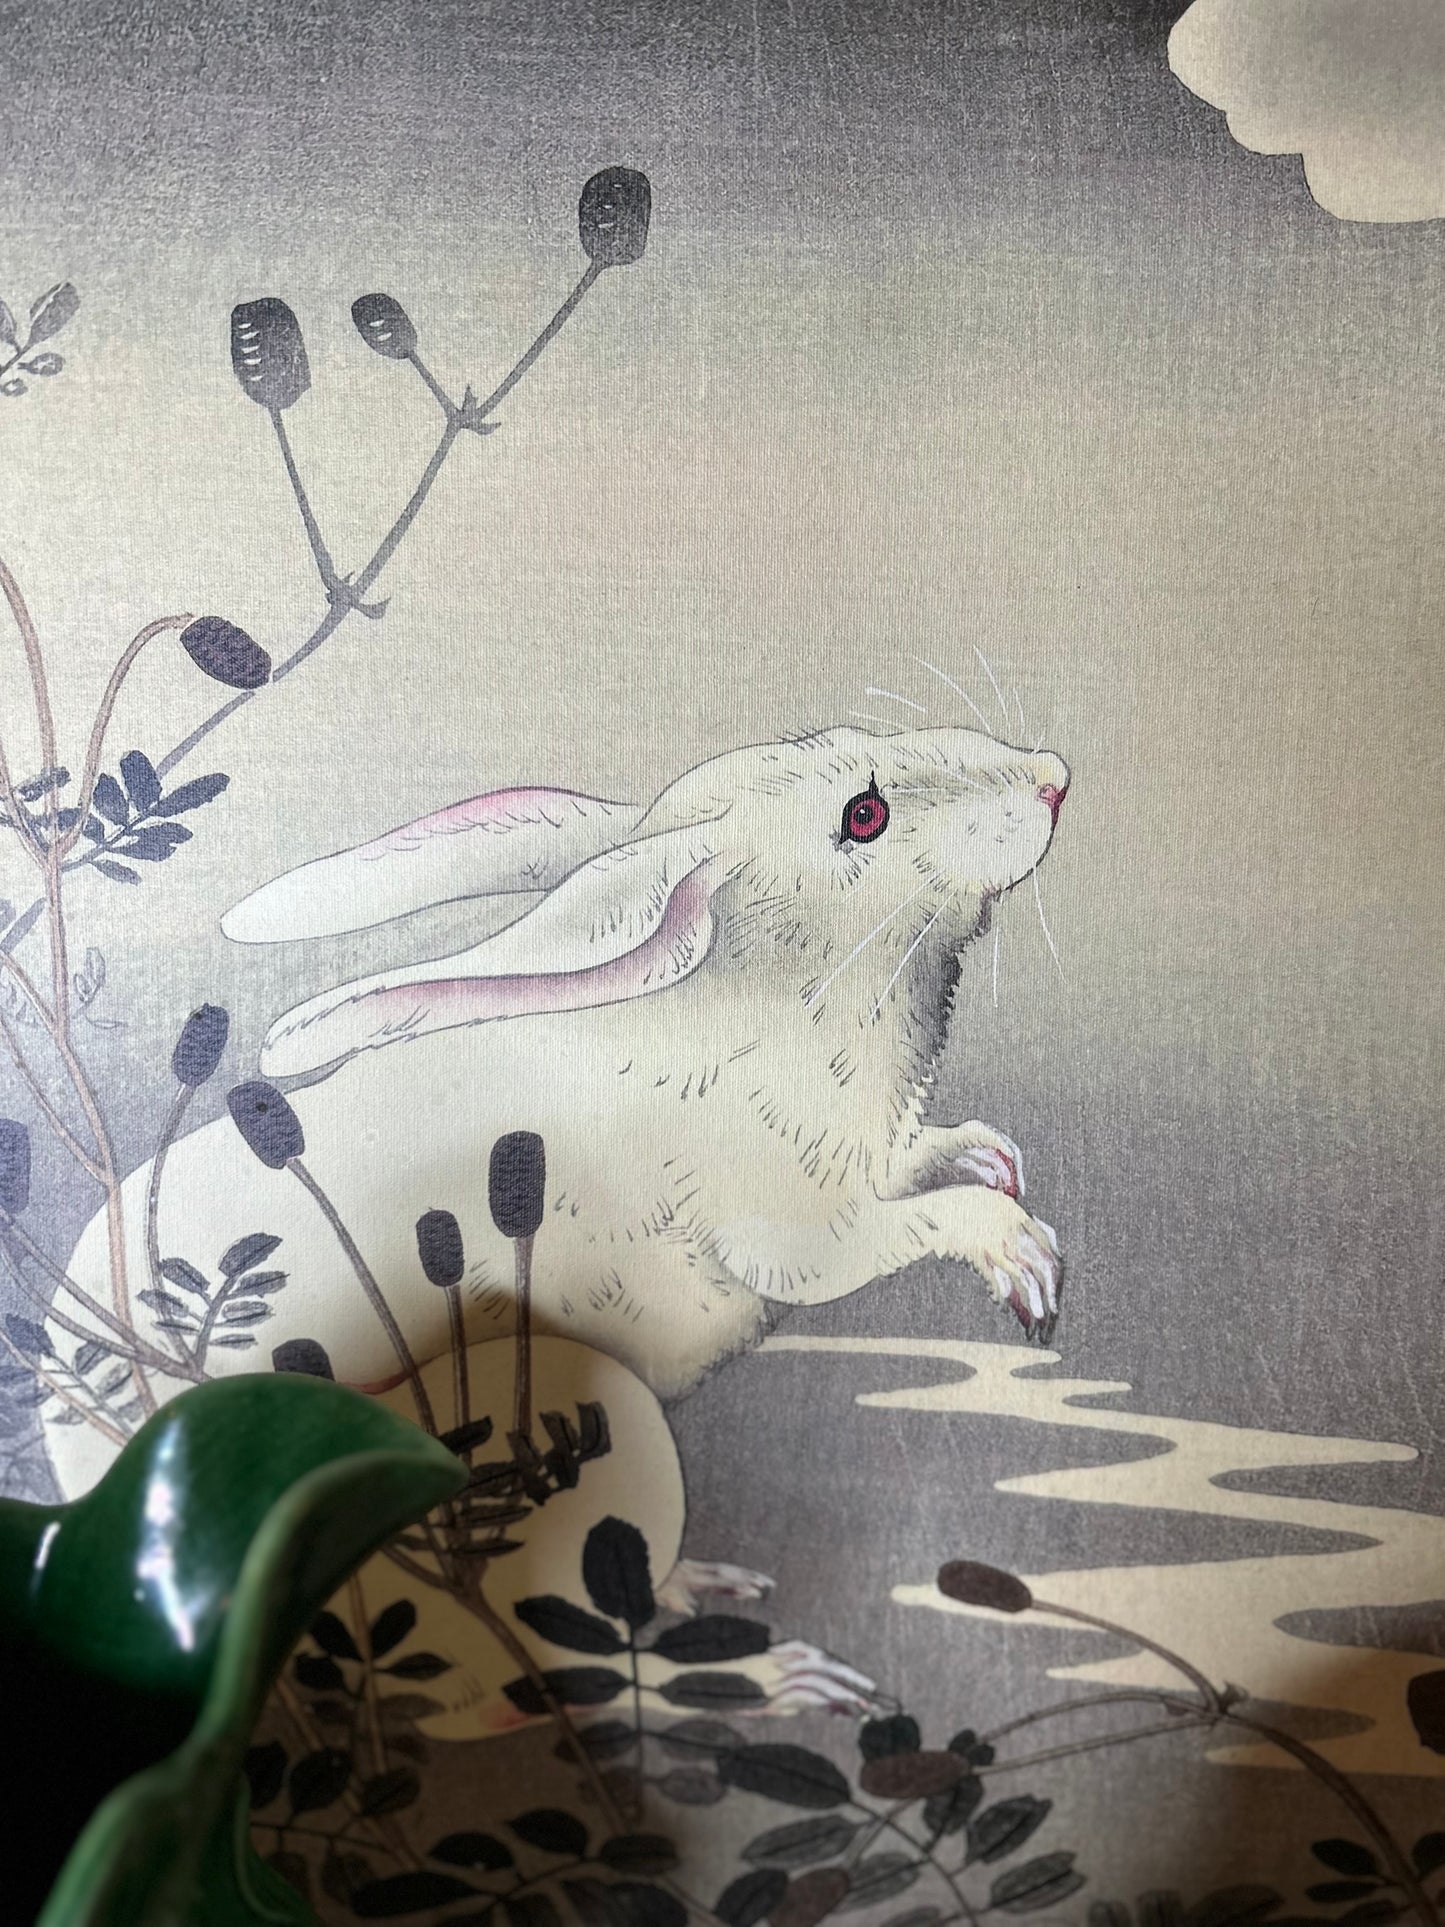 Rabbit Print on Canvas 17 1/2” by 25 1/2” tall